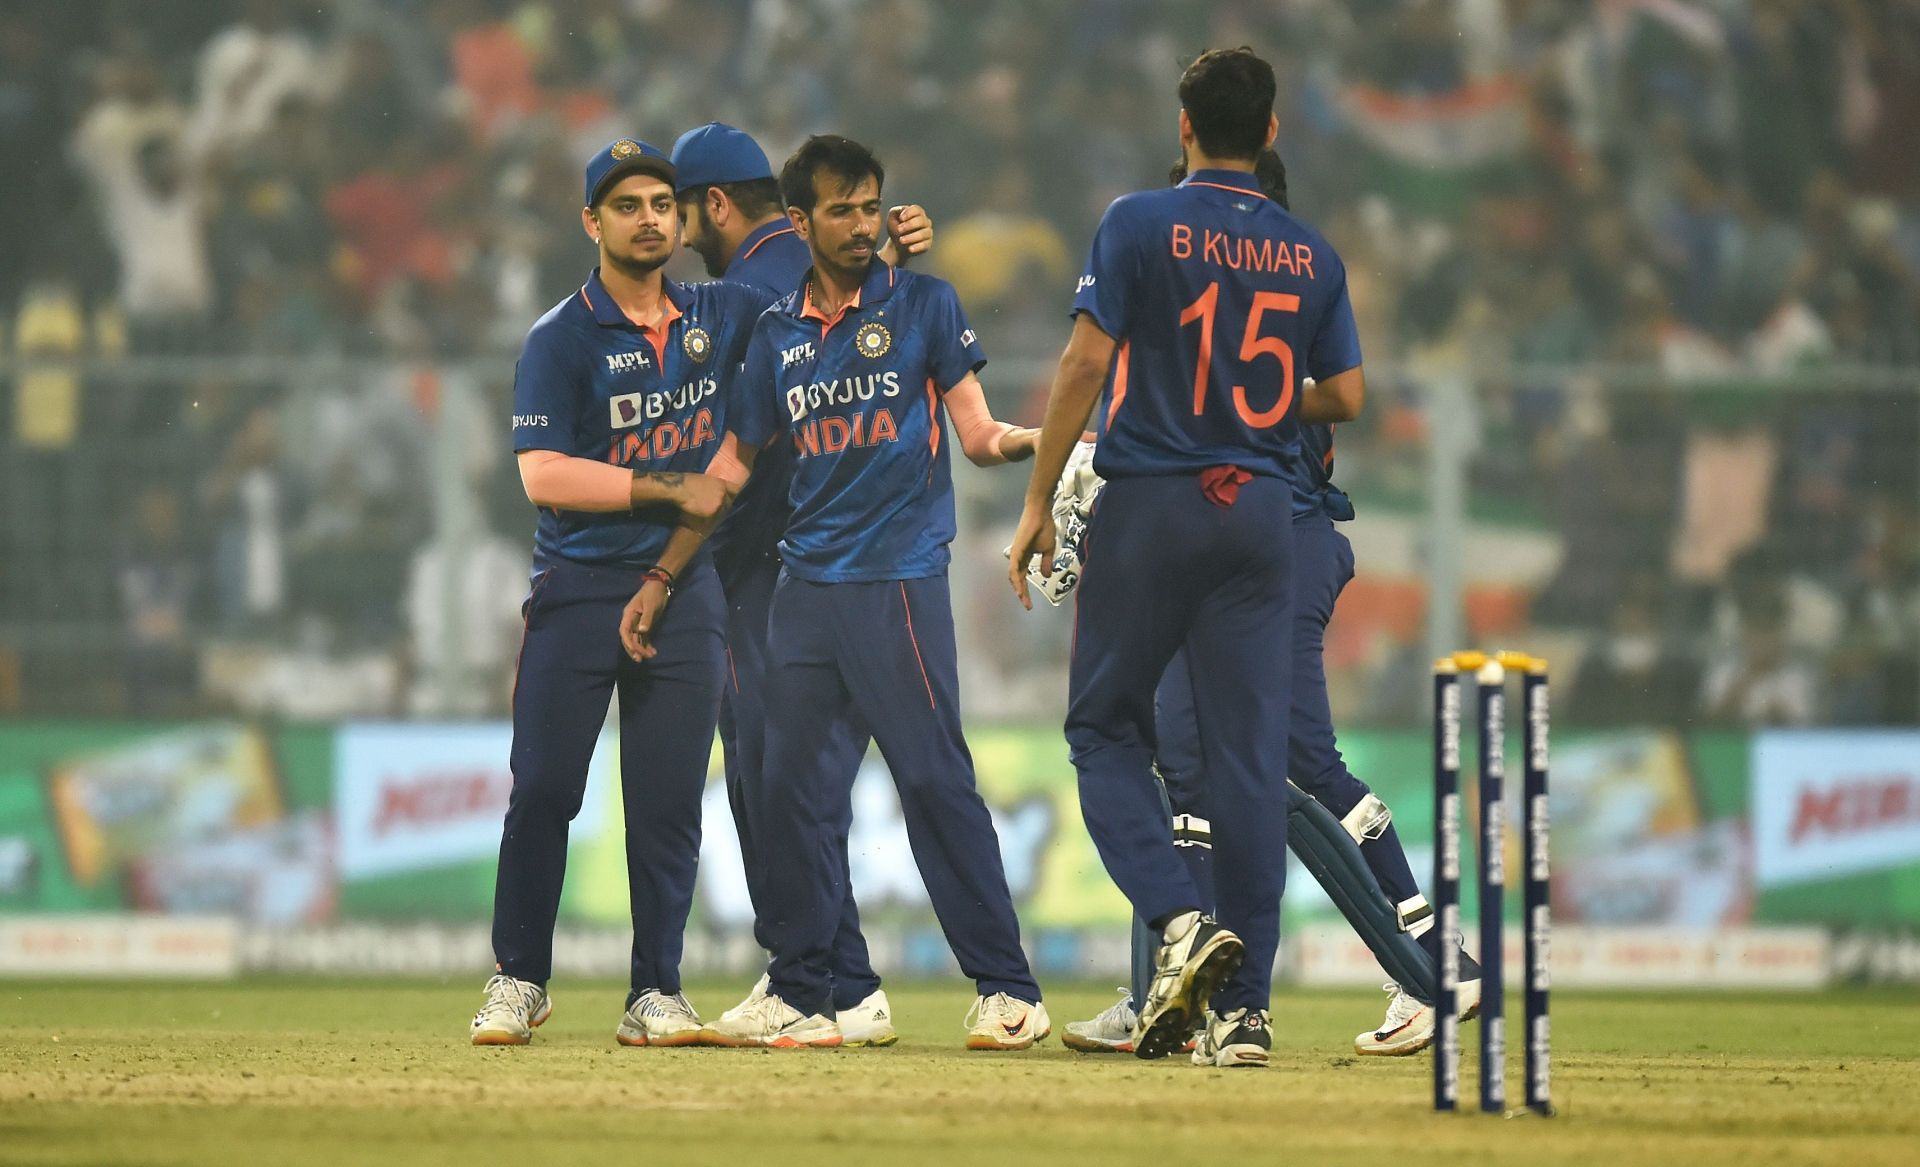 Team India leg-spinner Yuzvendra Chahal celebrates a wicket during the T20I series against the Kiwis. Pic: Getty Images